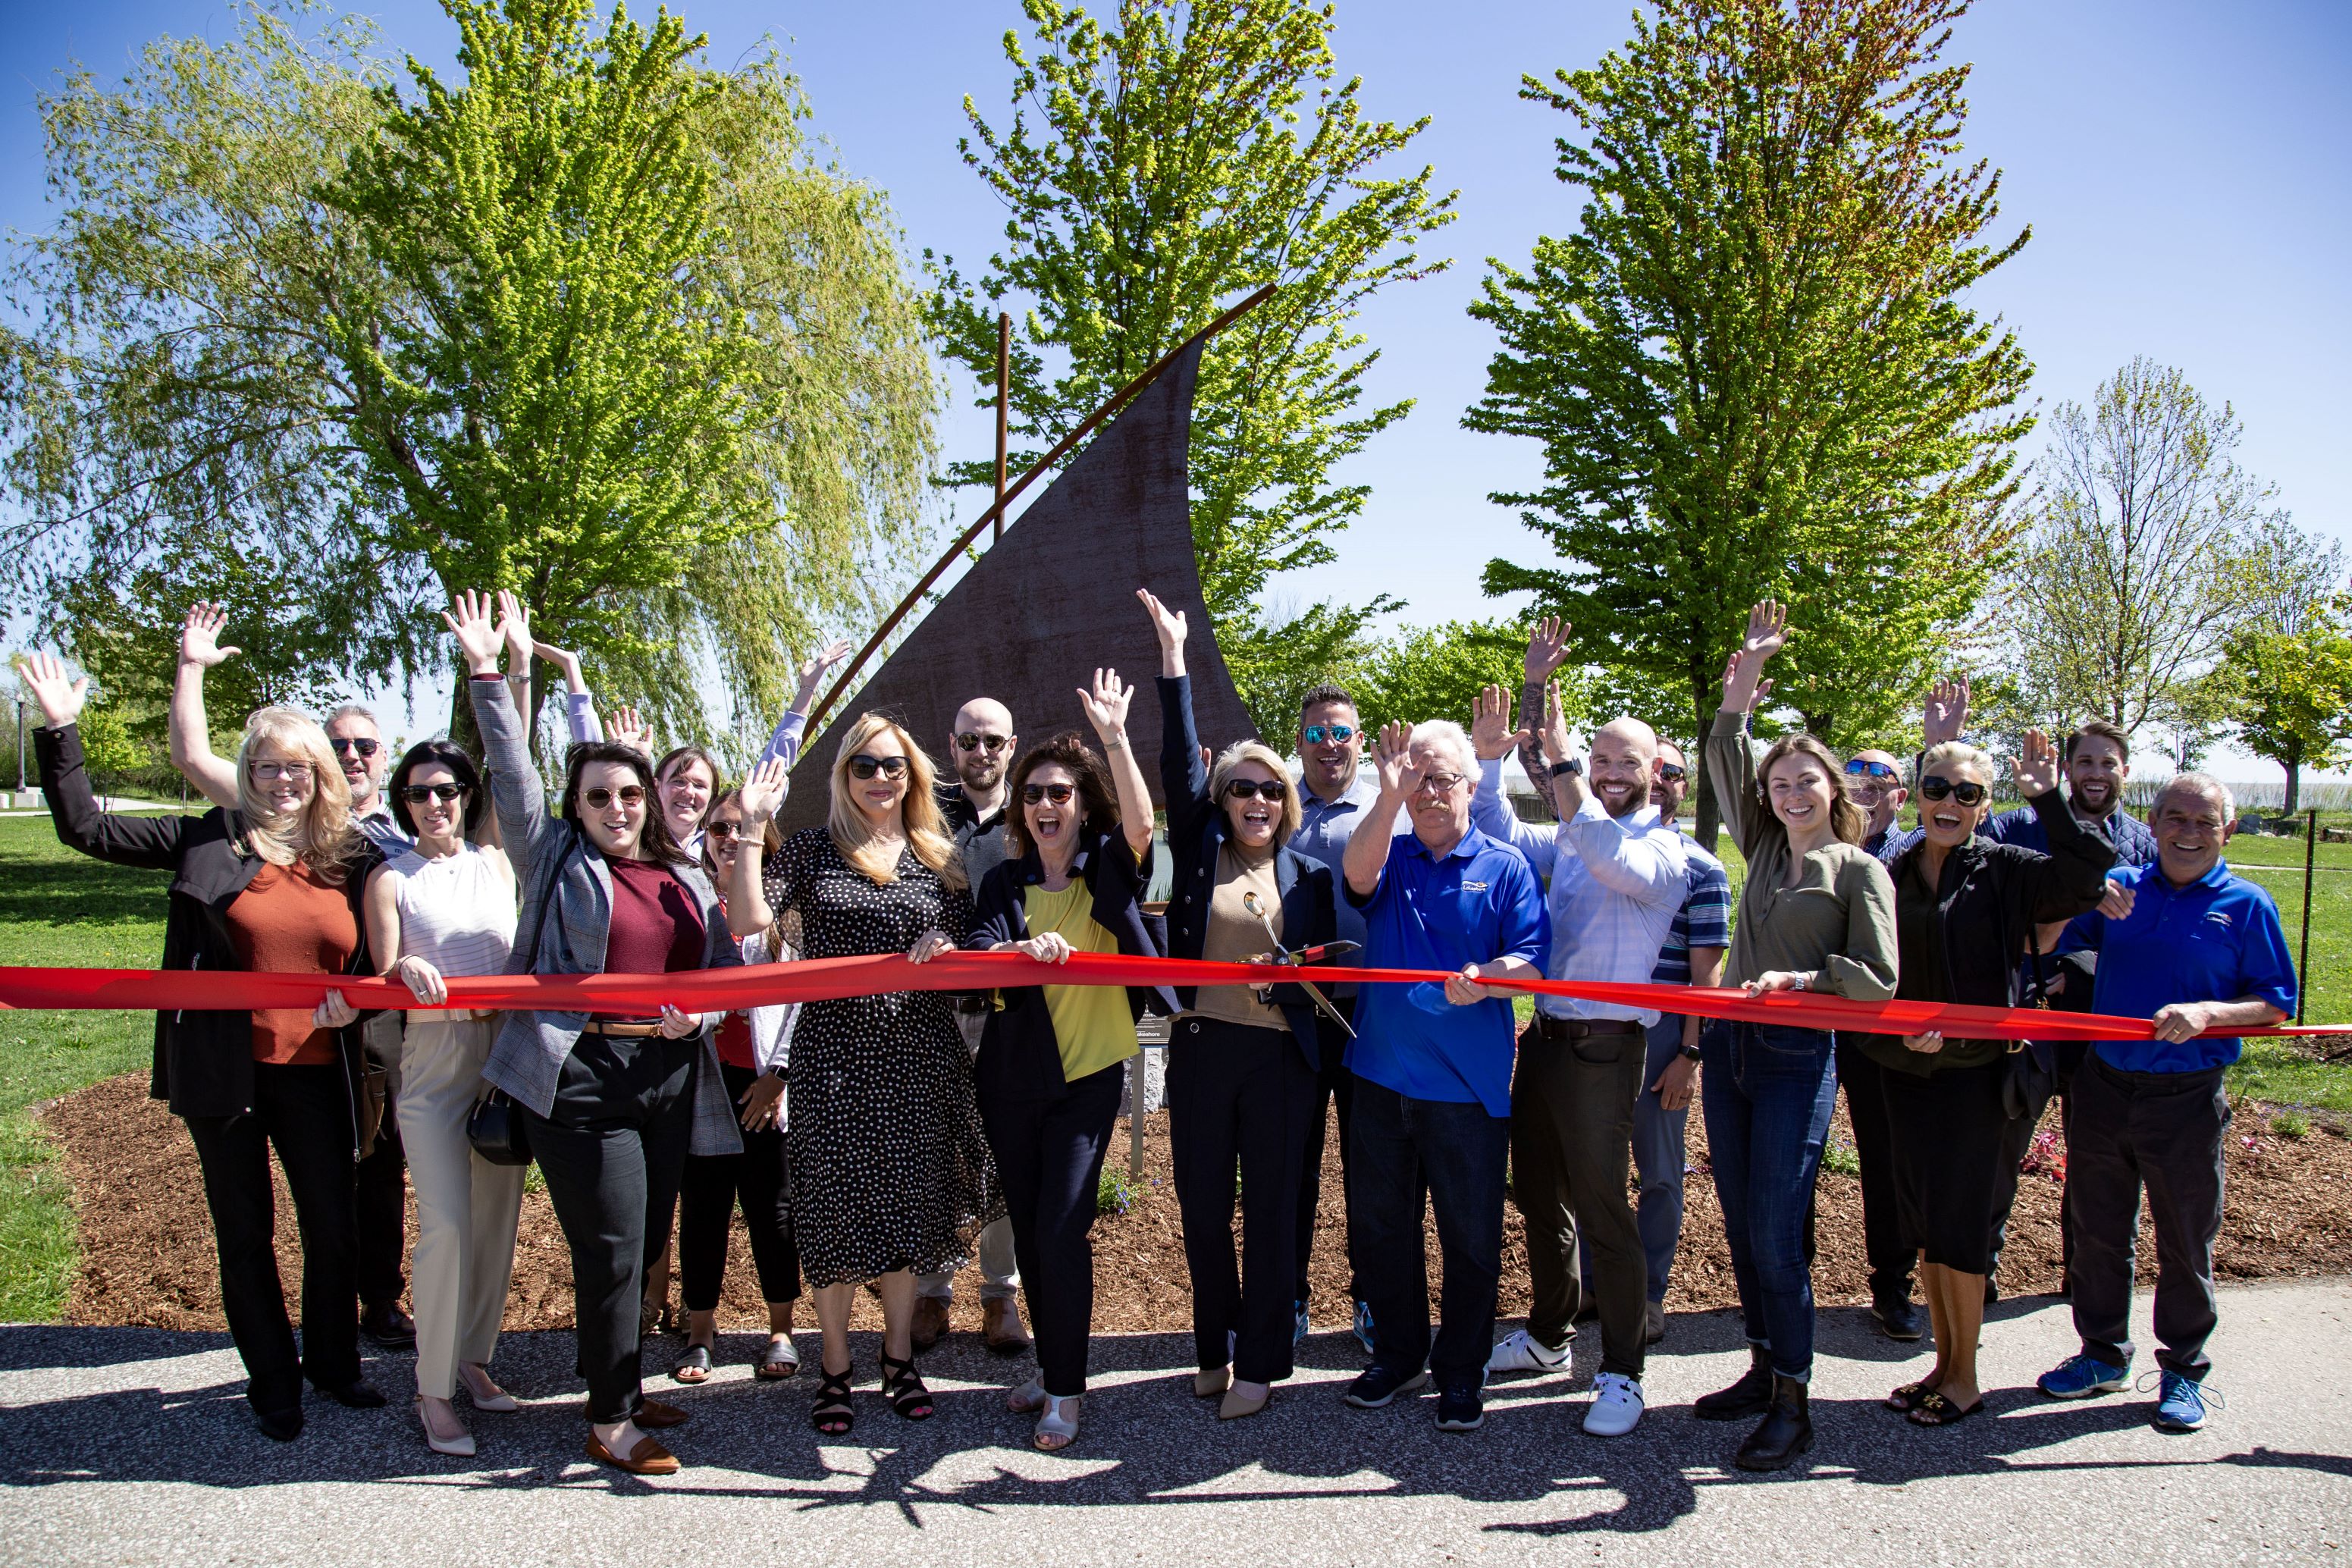 Image of group ribbon cutting in front of sailboat statue at park.